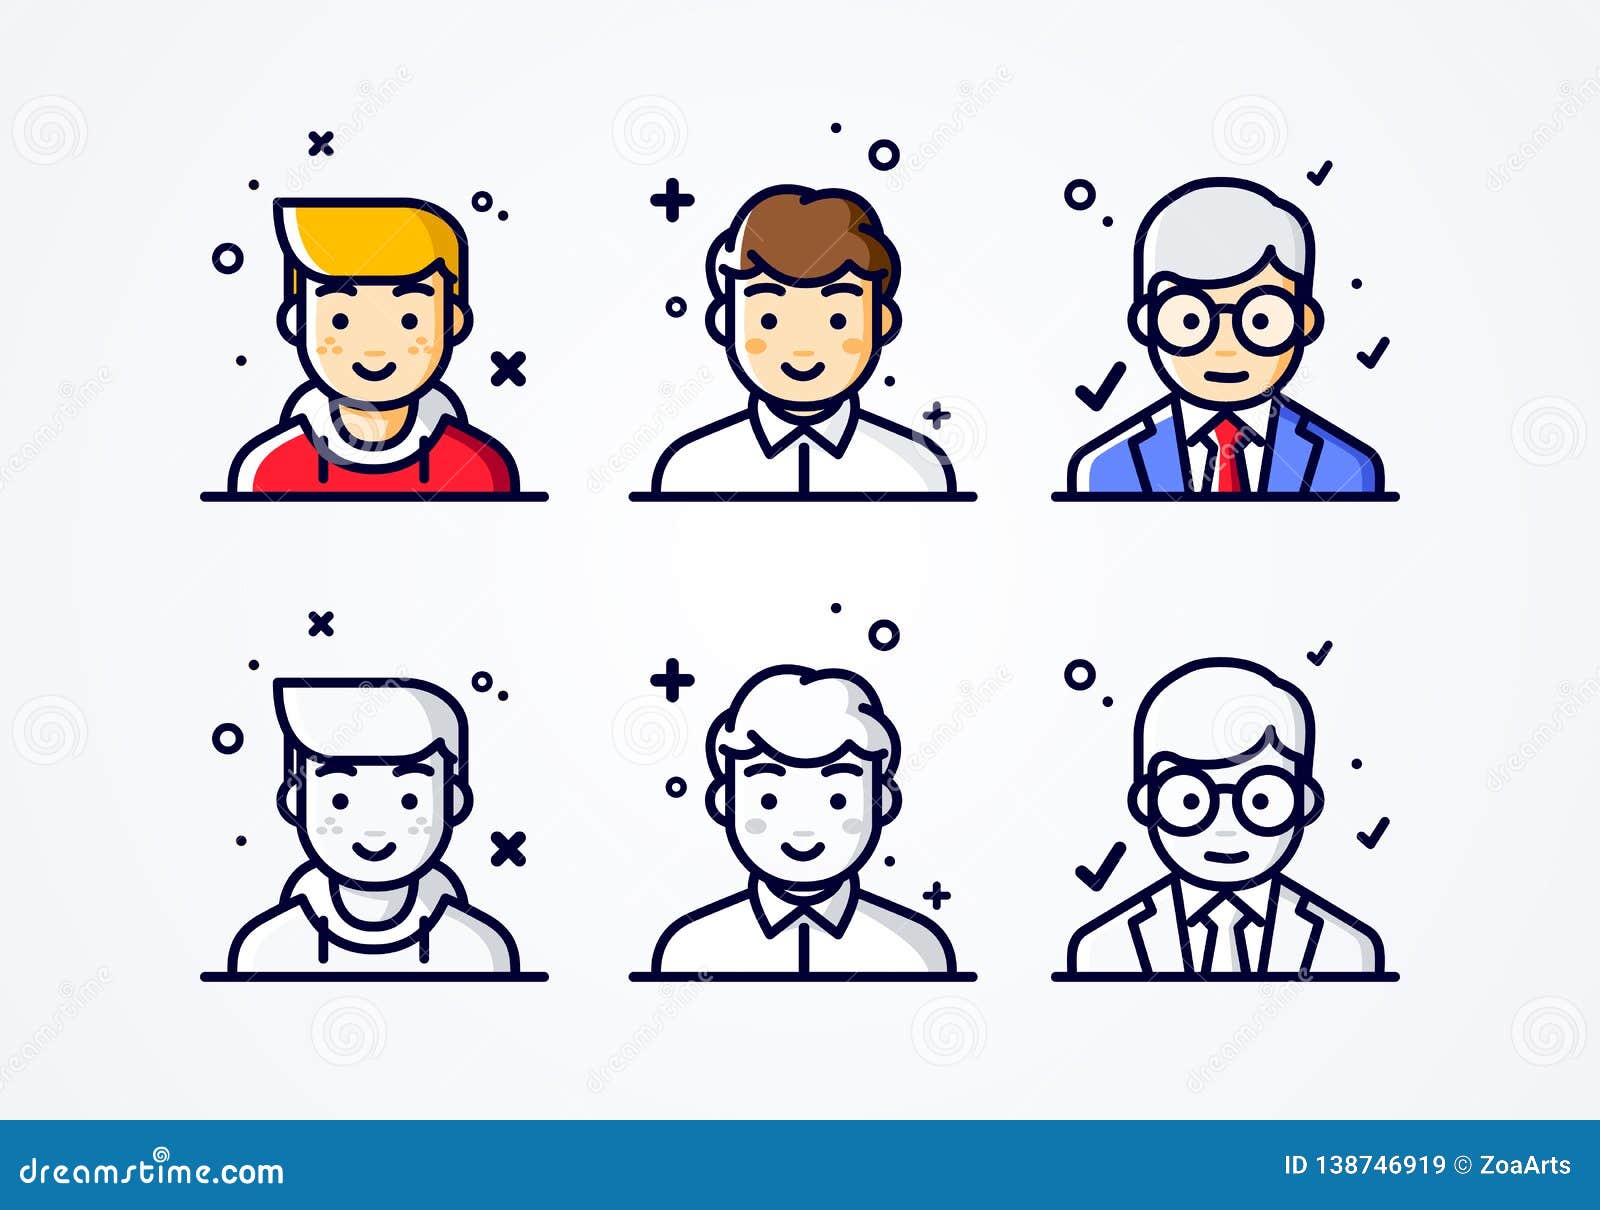  linear flat people faces icon set. social media avatar, user pic and profil. user experience concept different male smiley